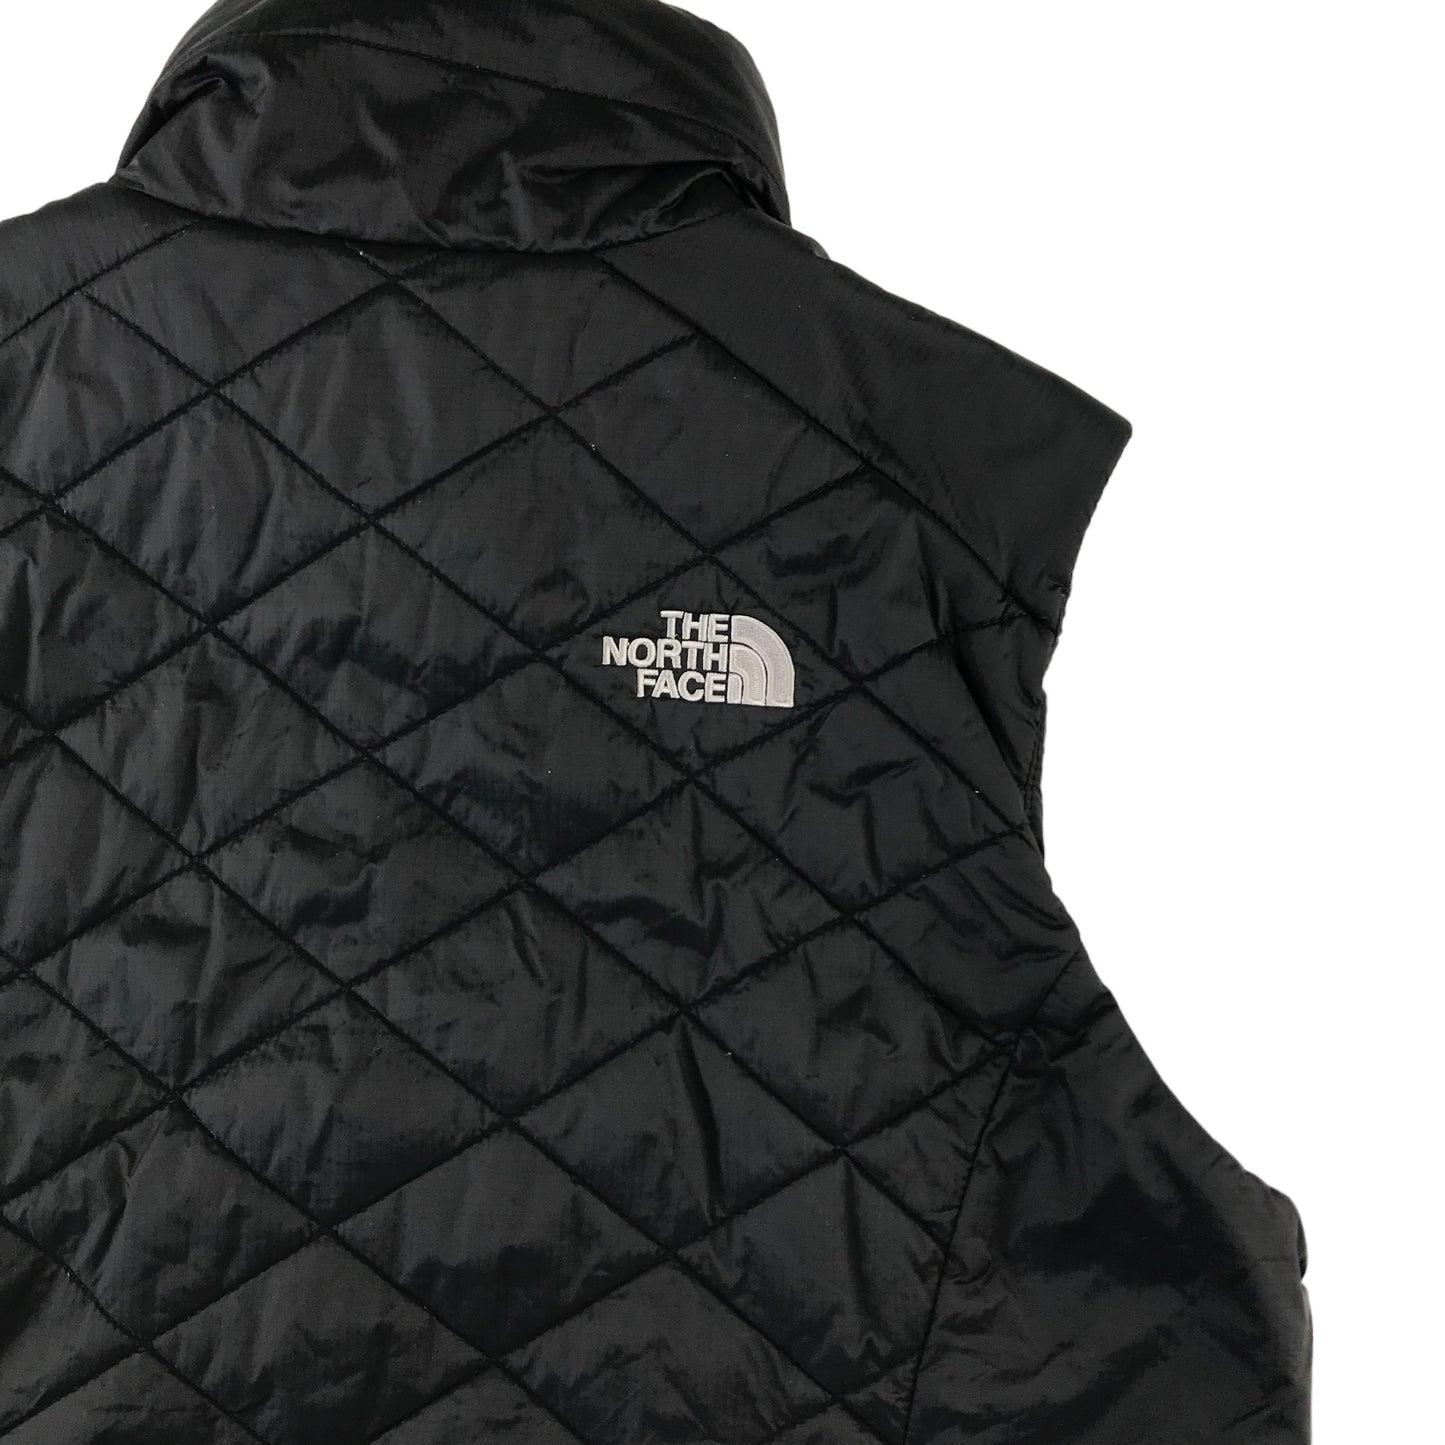 The North Face gilet size S women black light padded